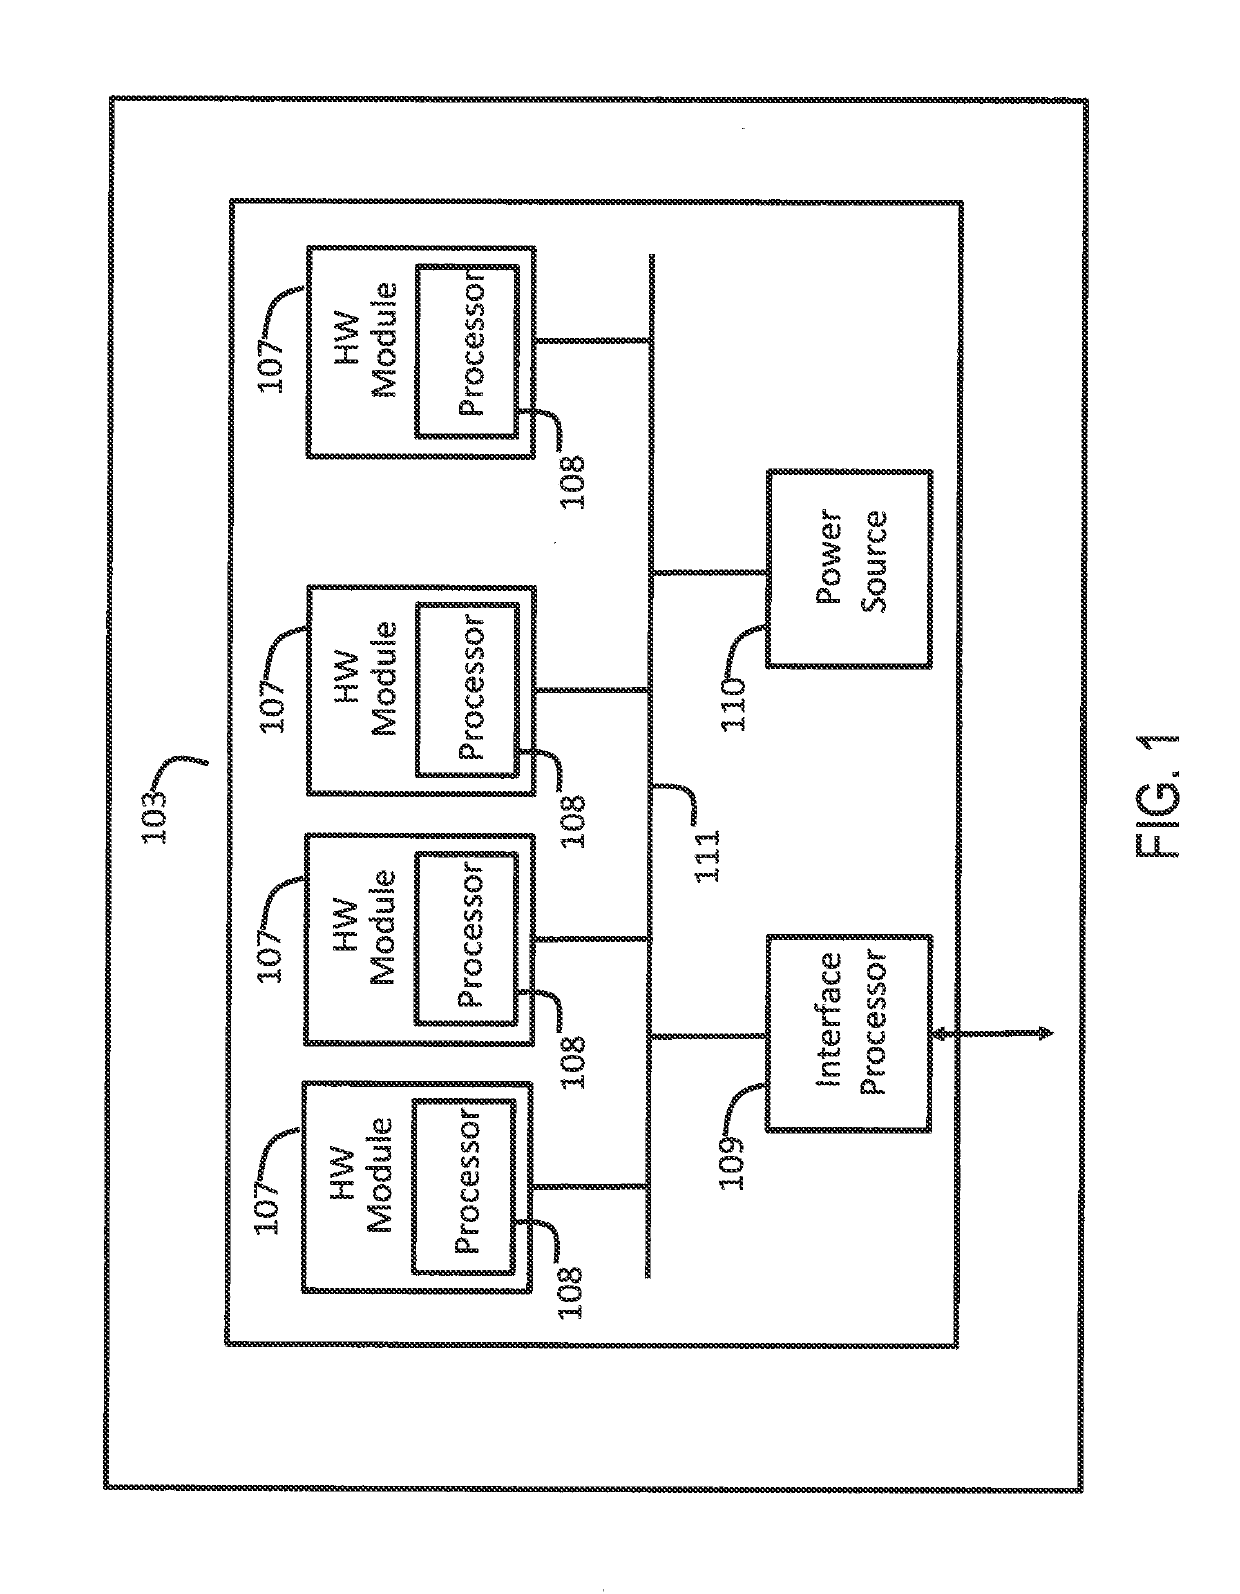 System and method for improved medical simulator